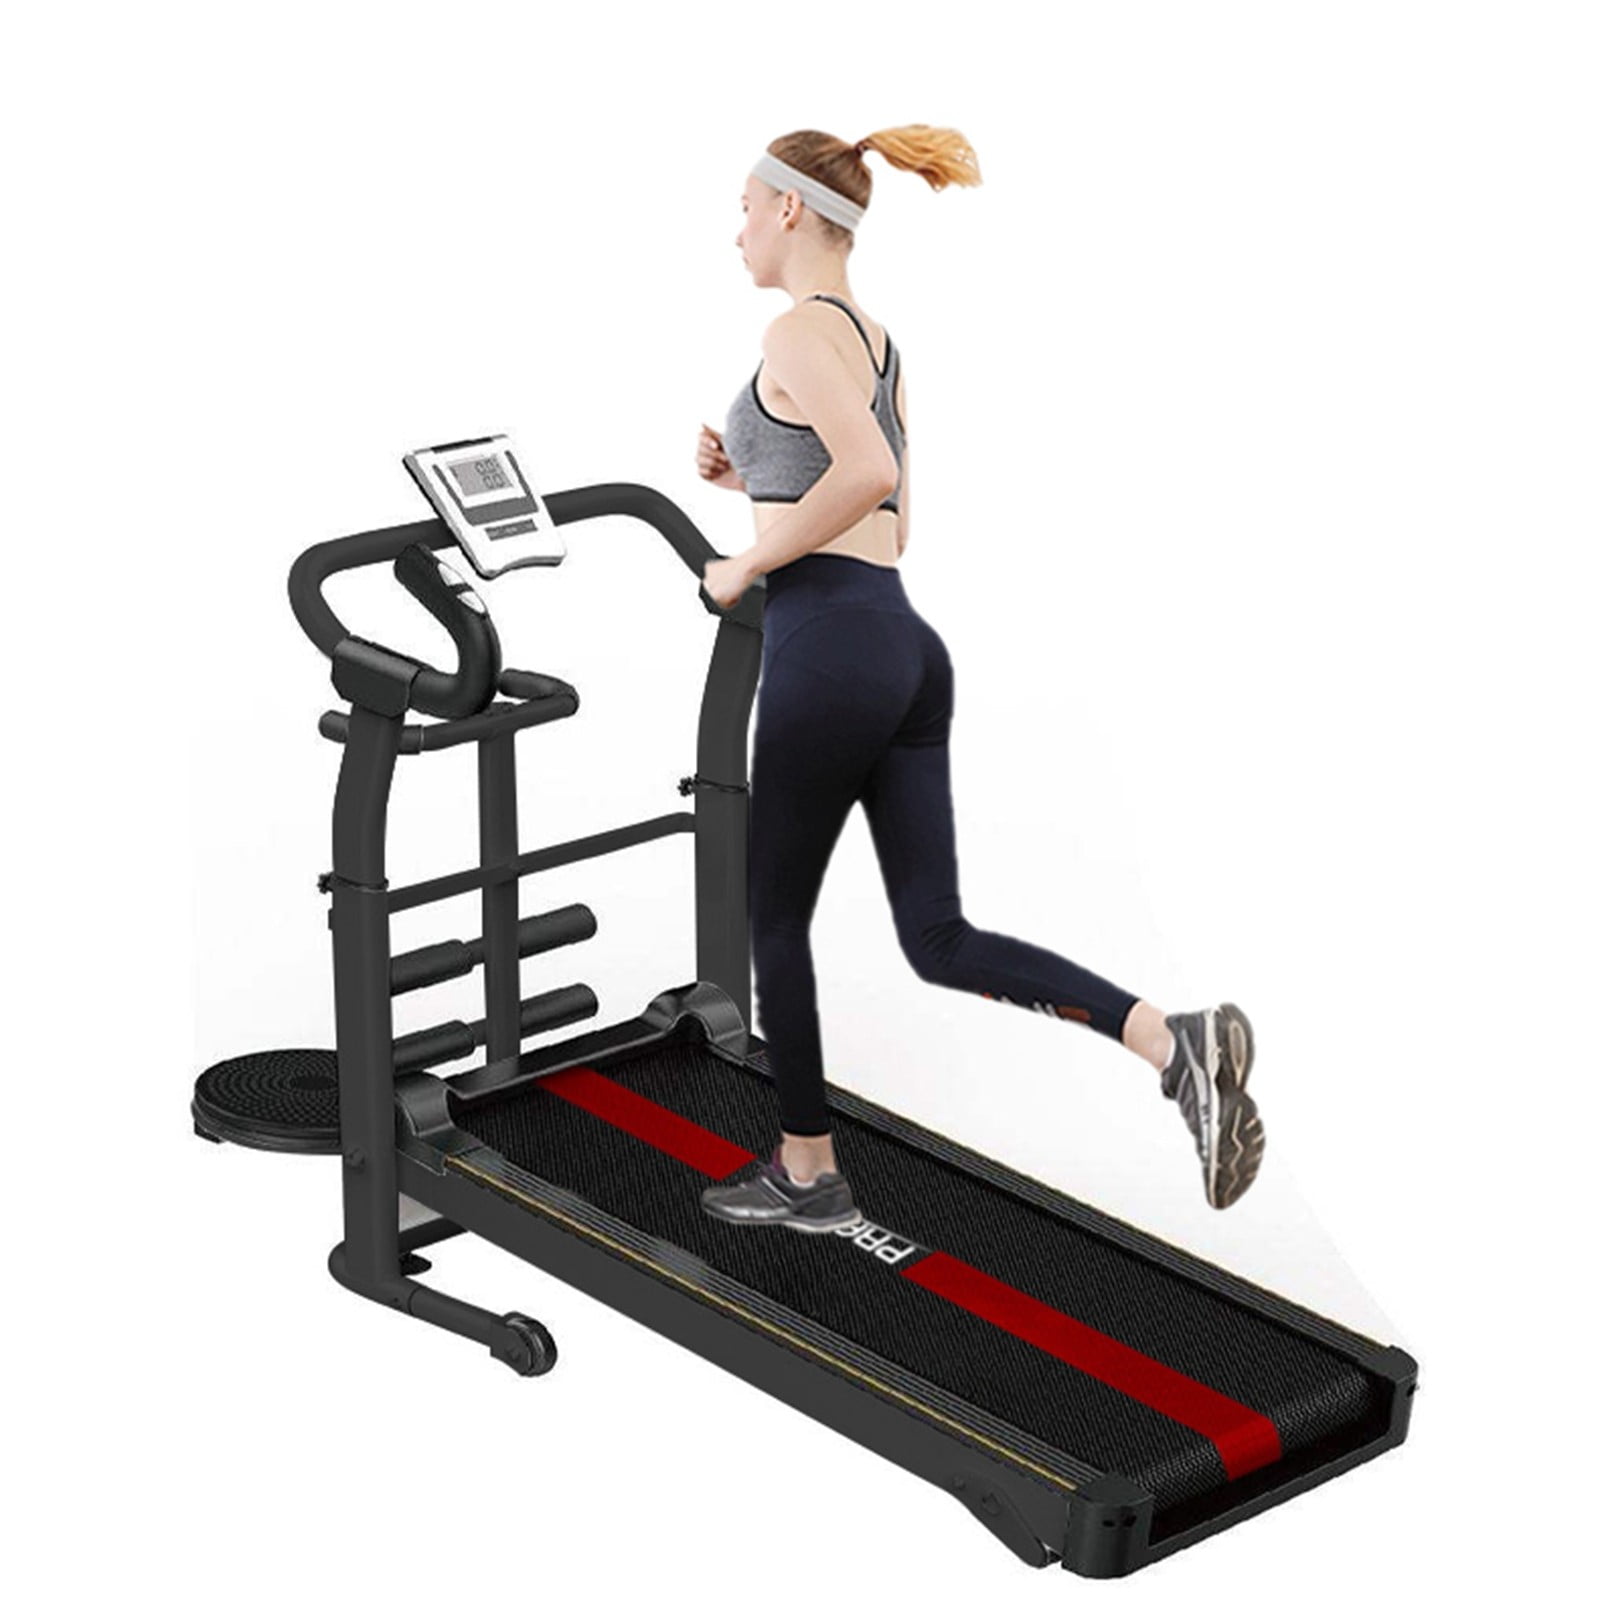 Super Shock-Absorbing Quiet Treadmill for Home Gym JATENG Folding Treadmill with Bluetooth Connectivity 2.5HP Electric Motorized Running Machine with Manual Incline & Speakers